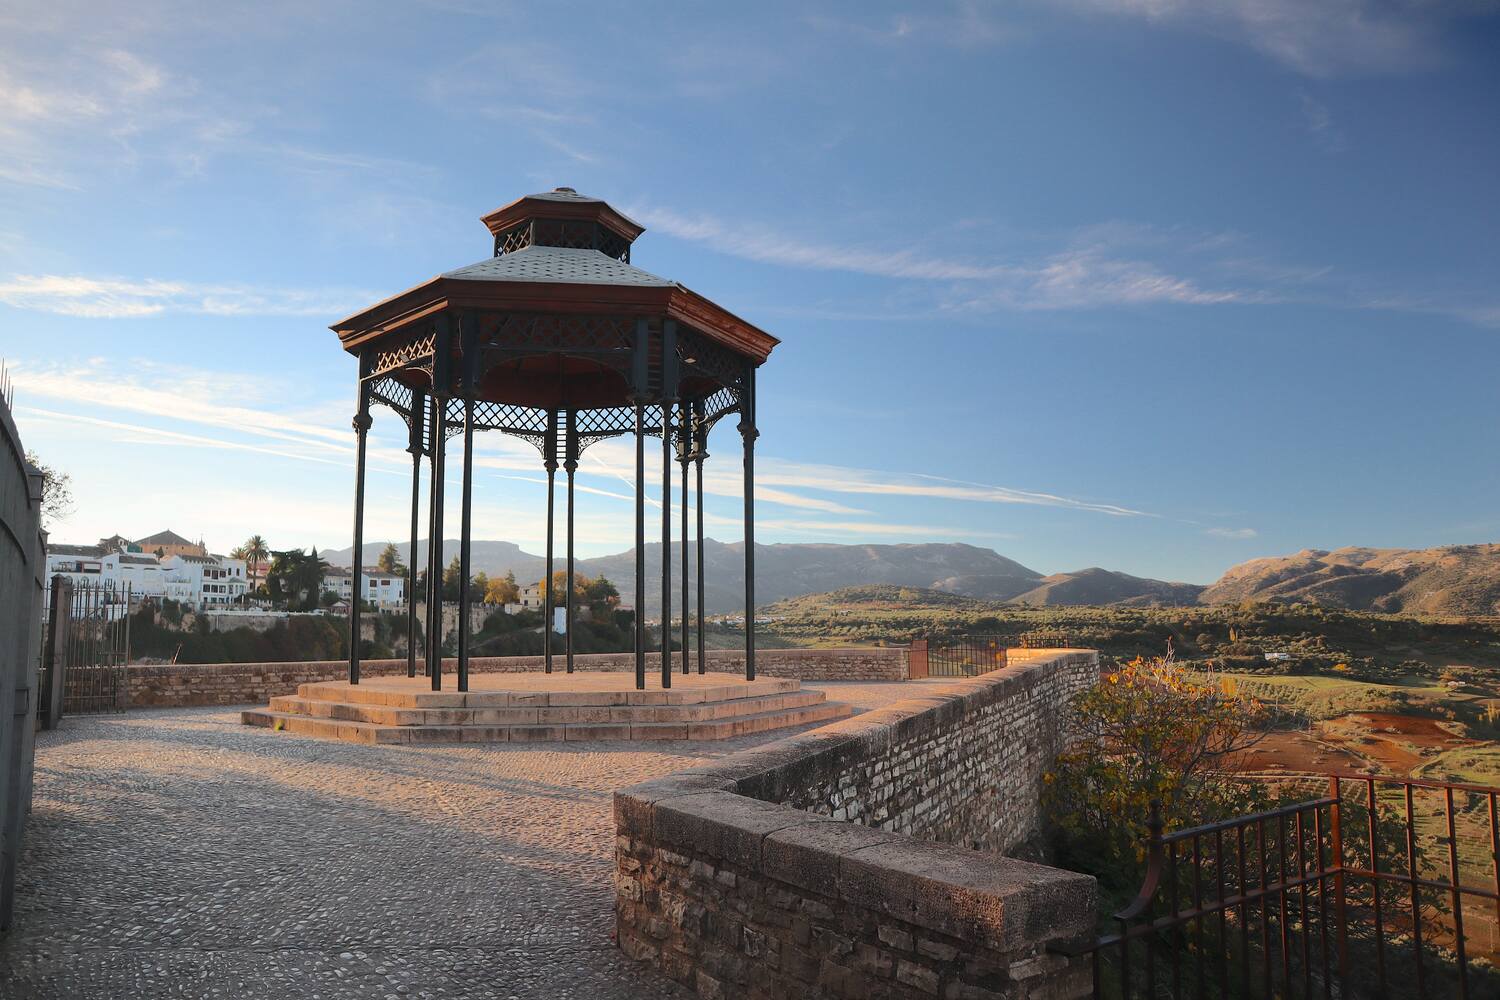 A gazebo on a clear day with a bench overlooking a panoramic view of a hilly landscape.